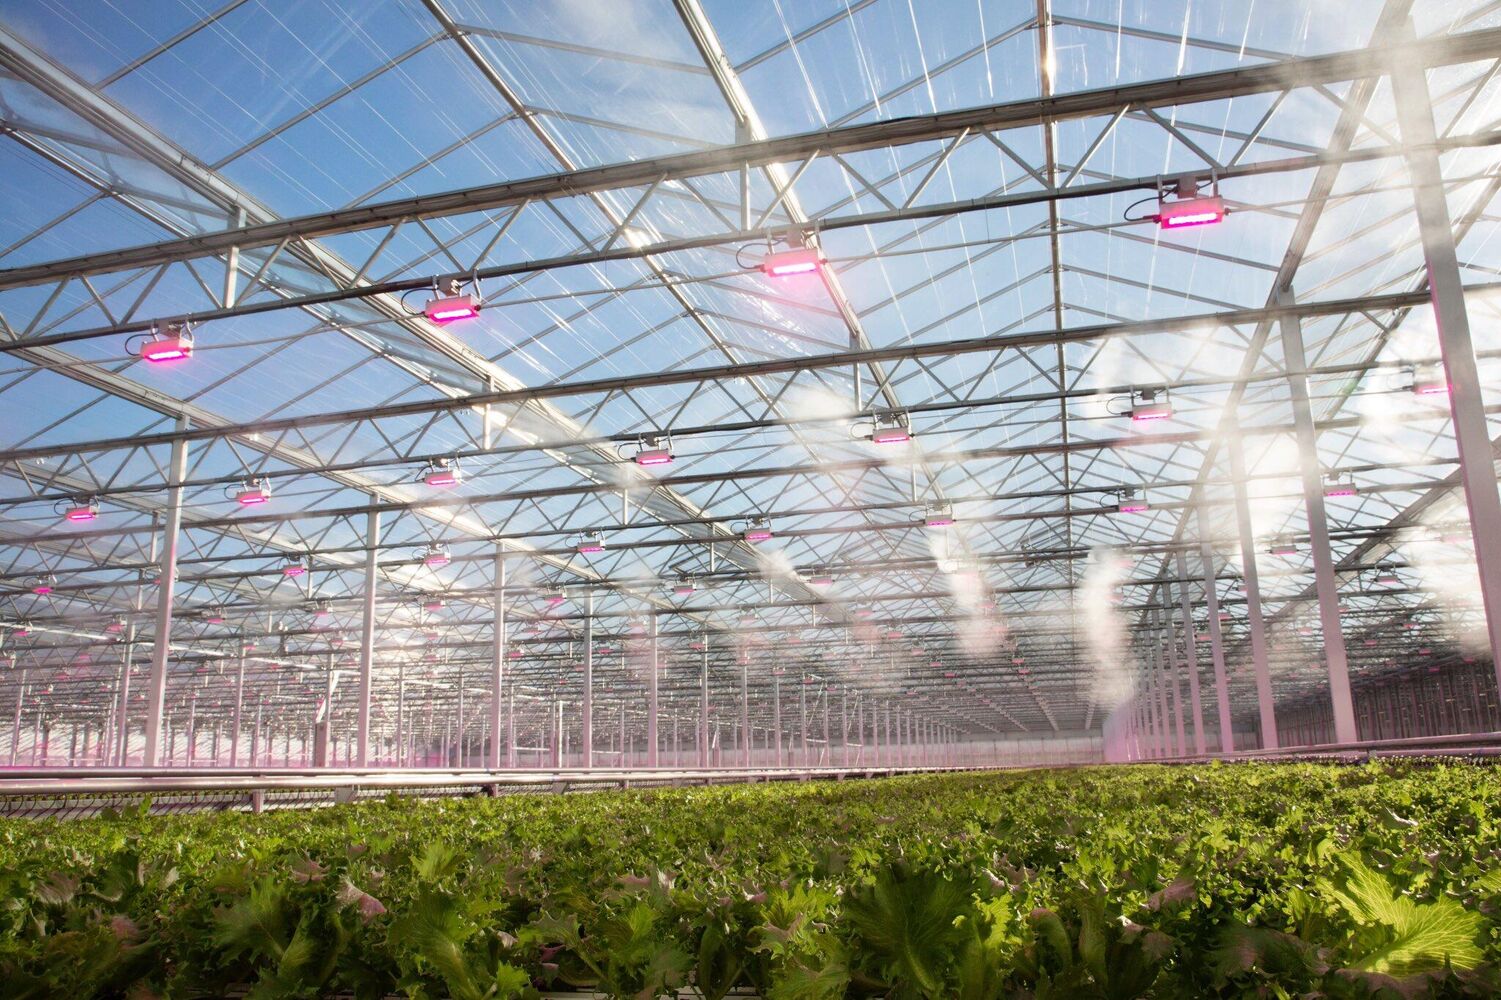 InGreenhouses: This greenhouse has everything a grower could dream of!